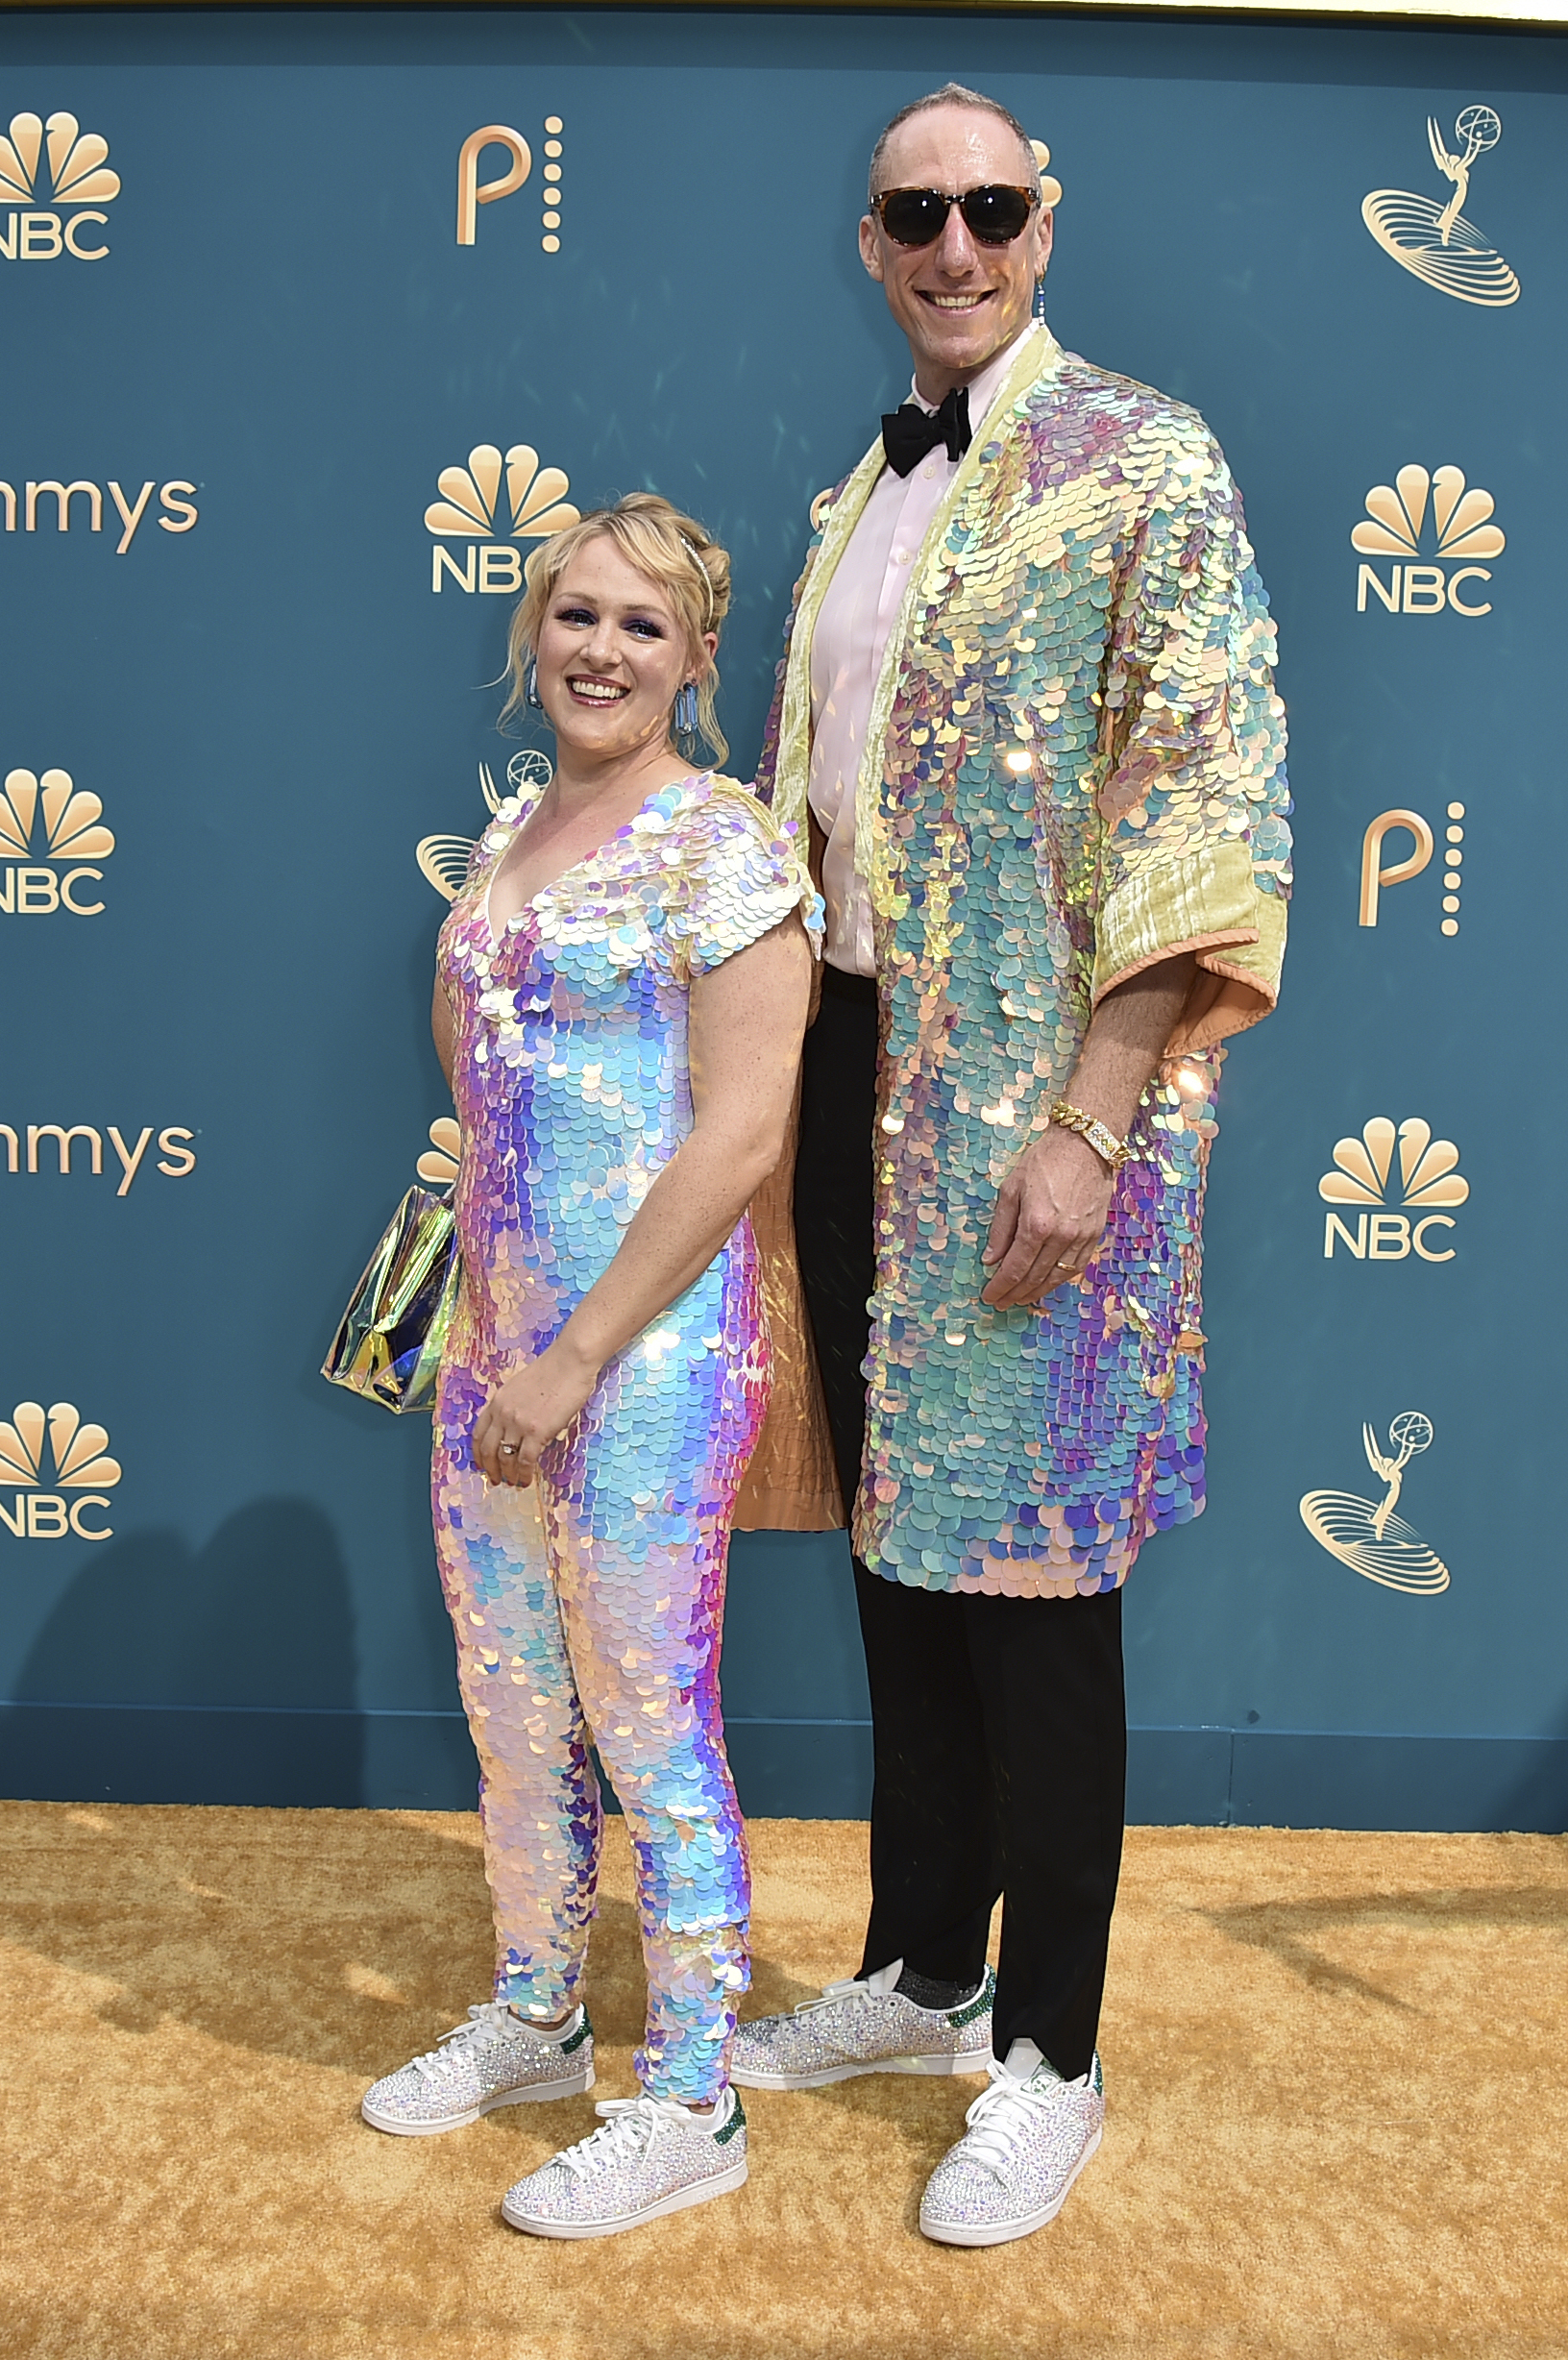 Ariel Dumas and Andrew Ecker wearing sequined suits and shimmery sneakers